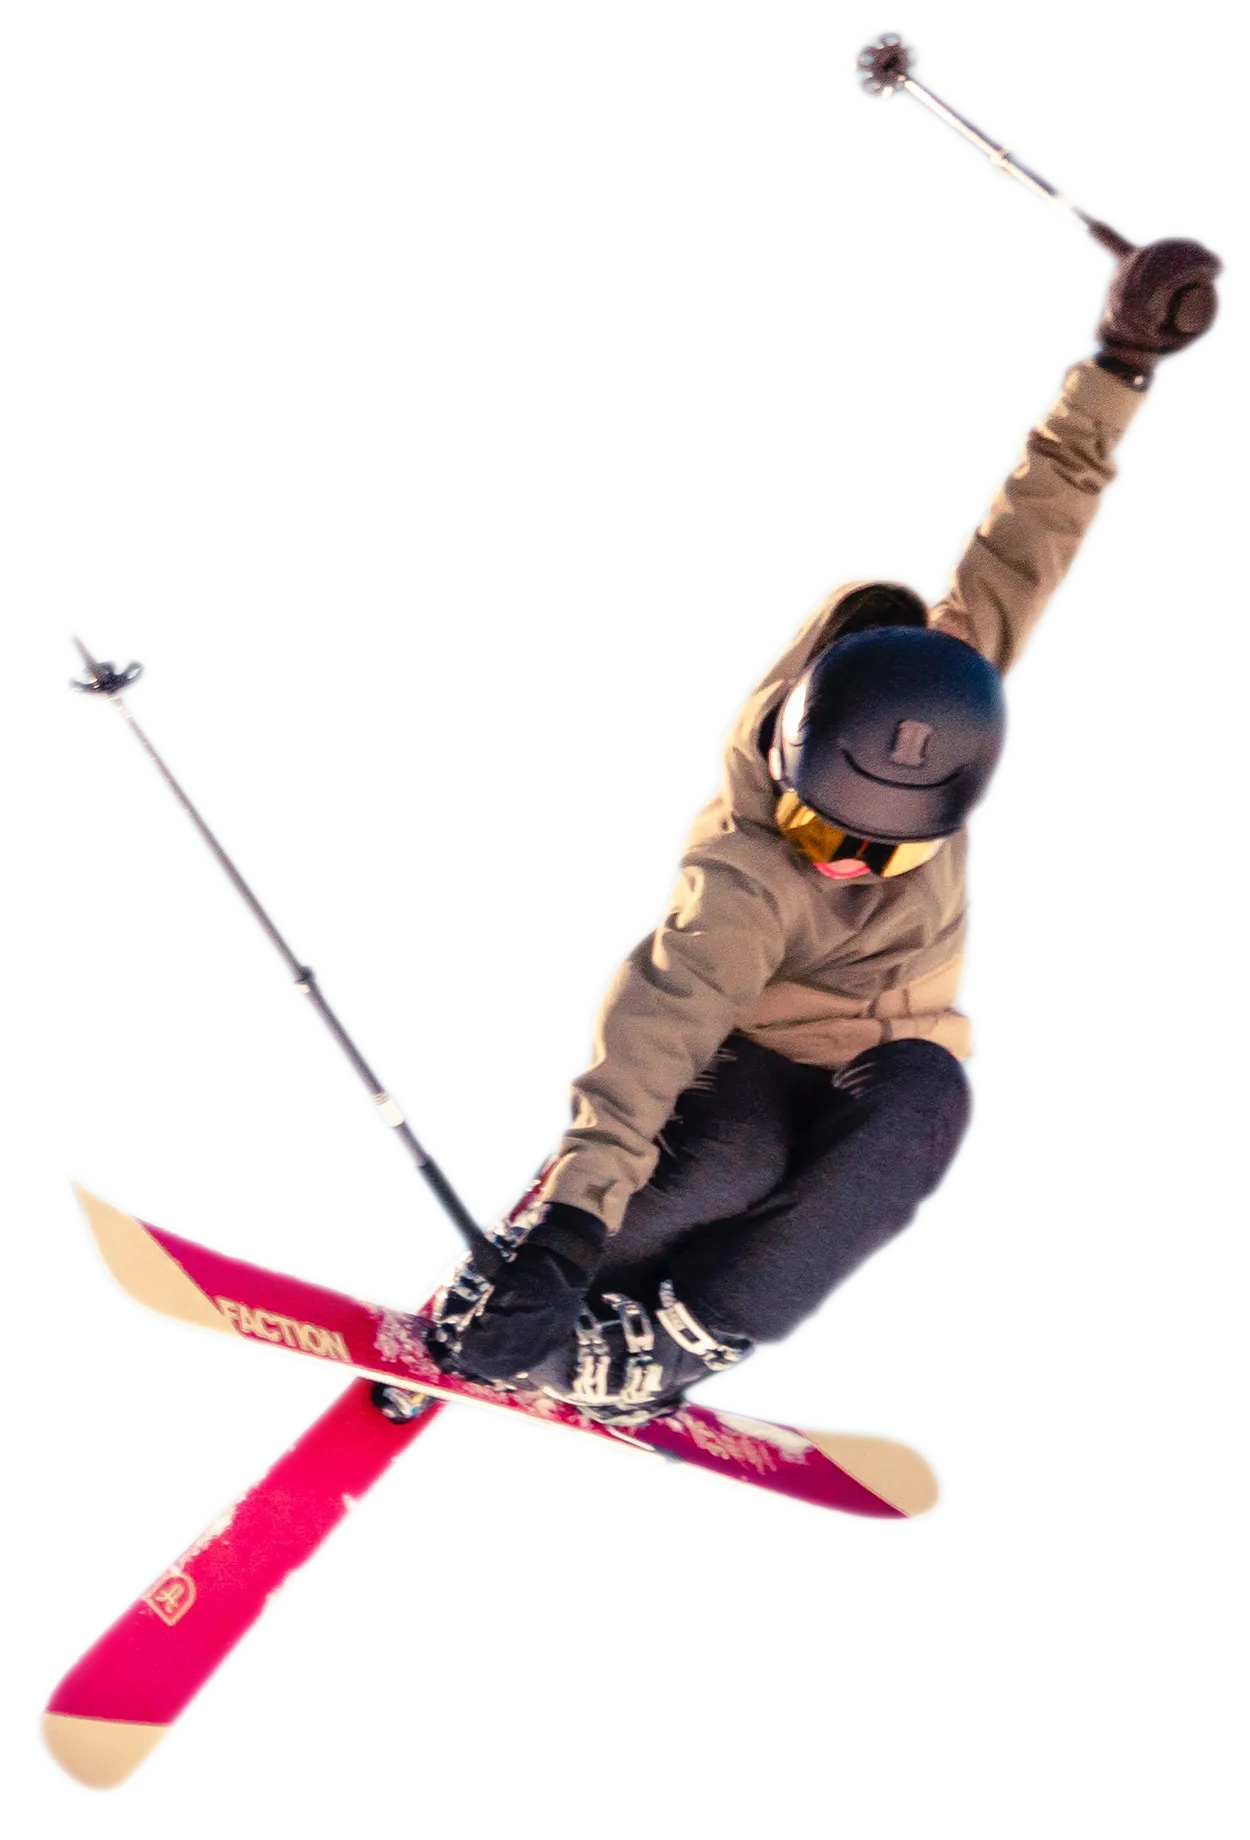 A floating skier mid-air